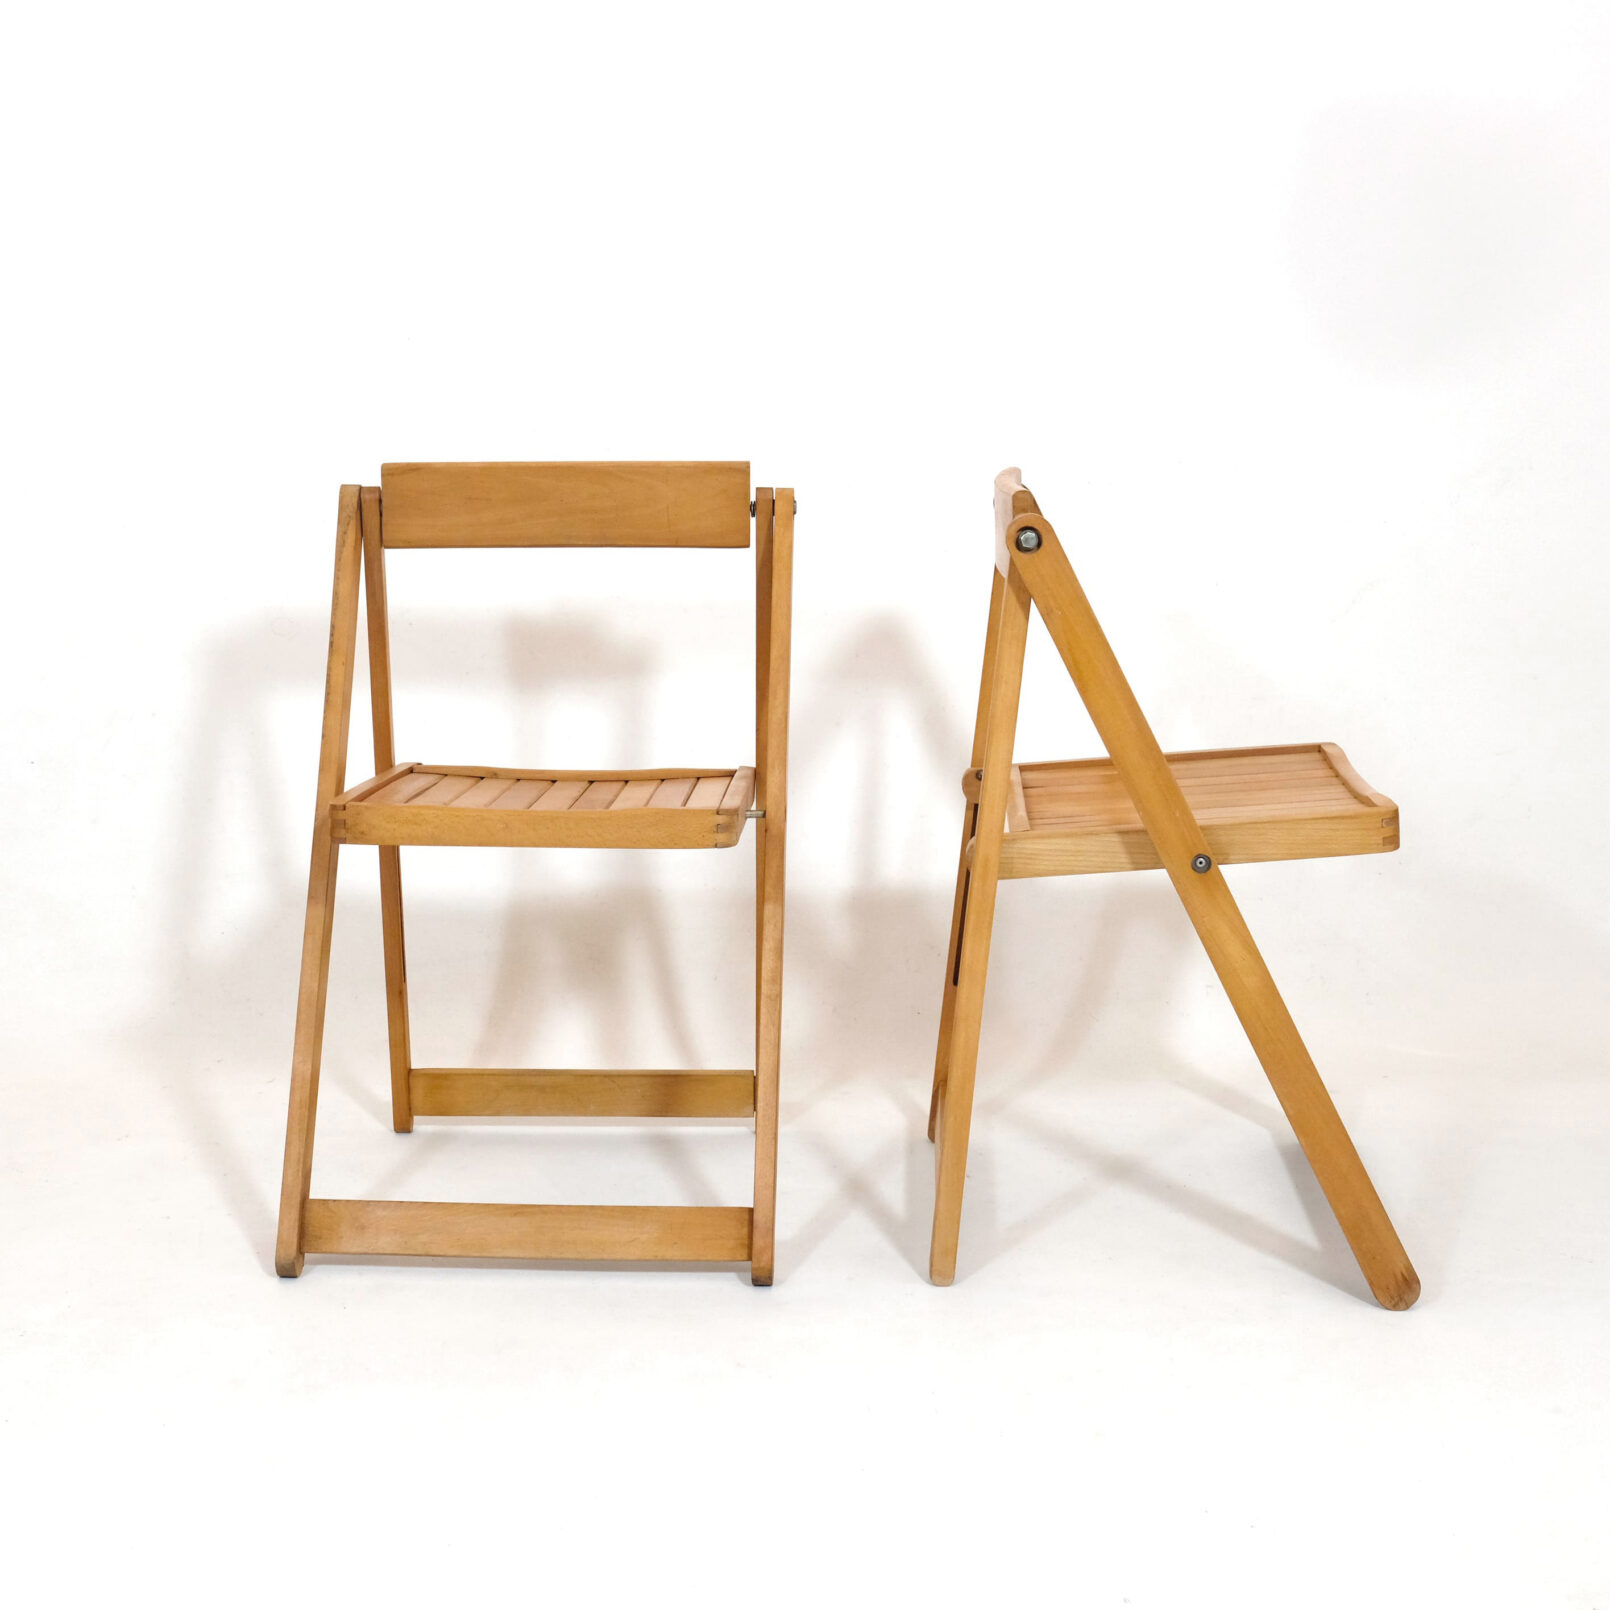 Pair of folding wooden chairs from the 80s.